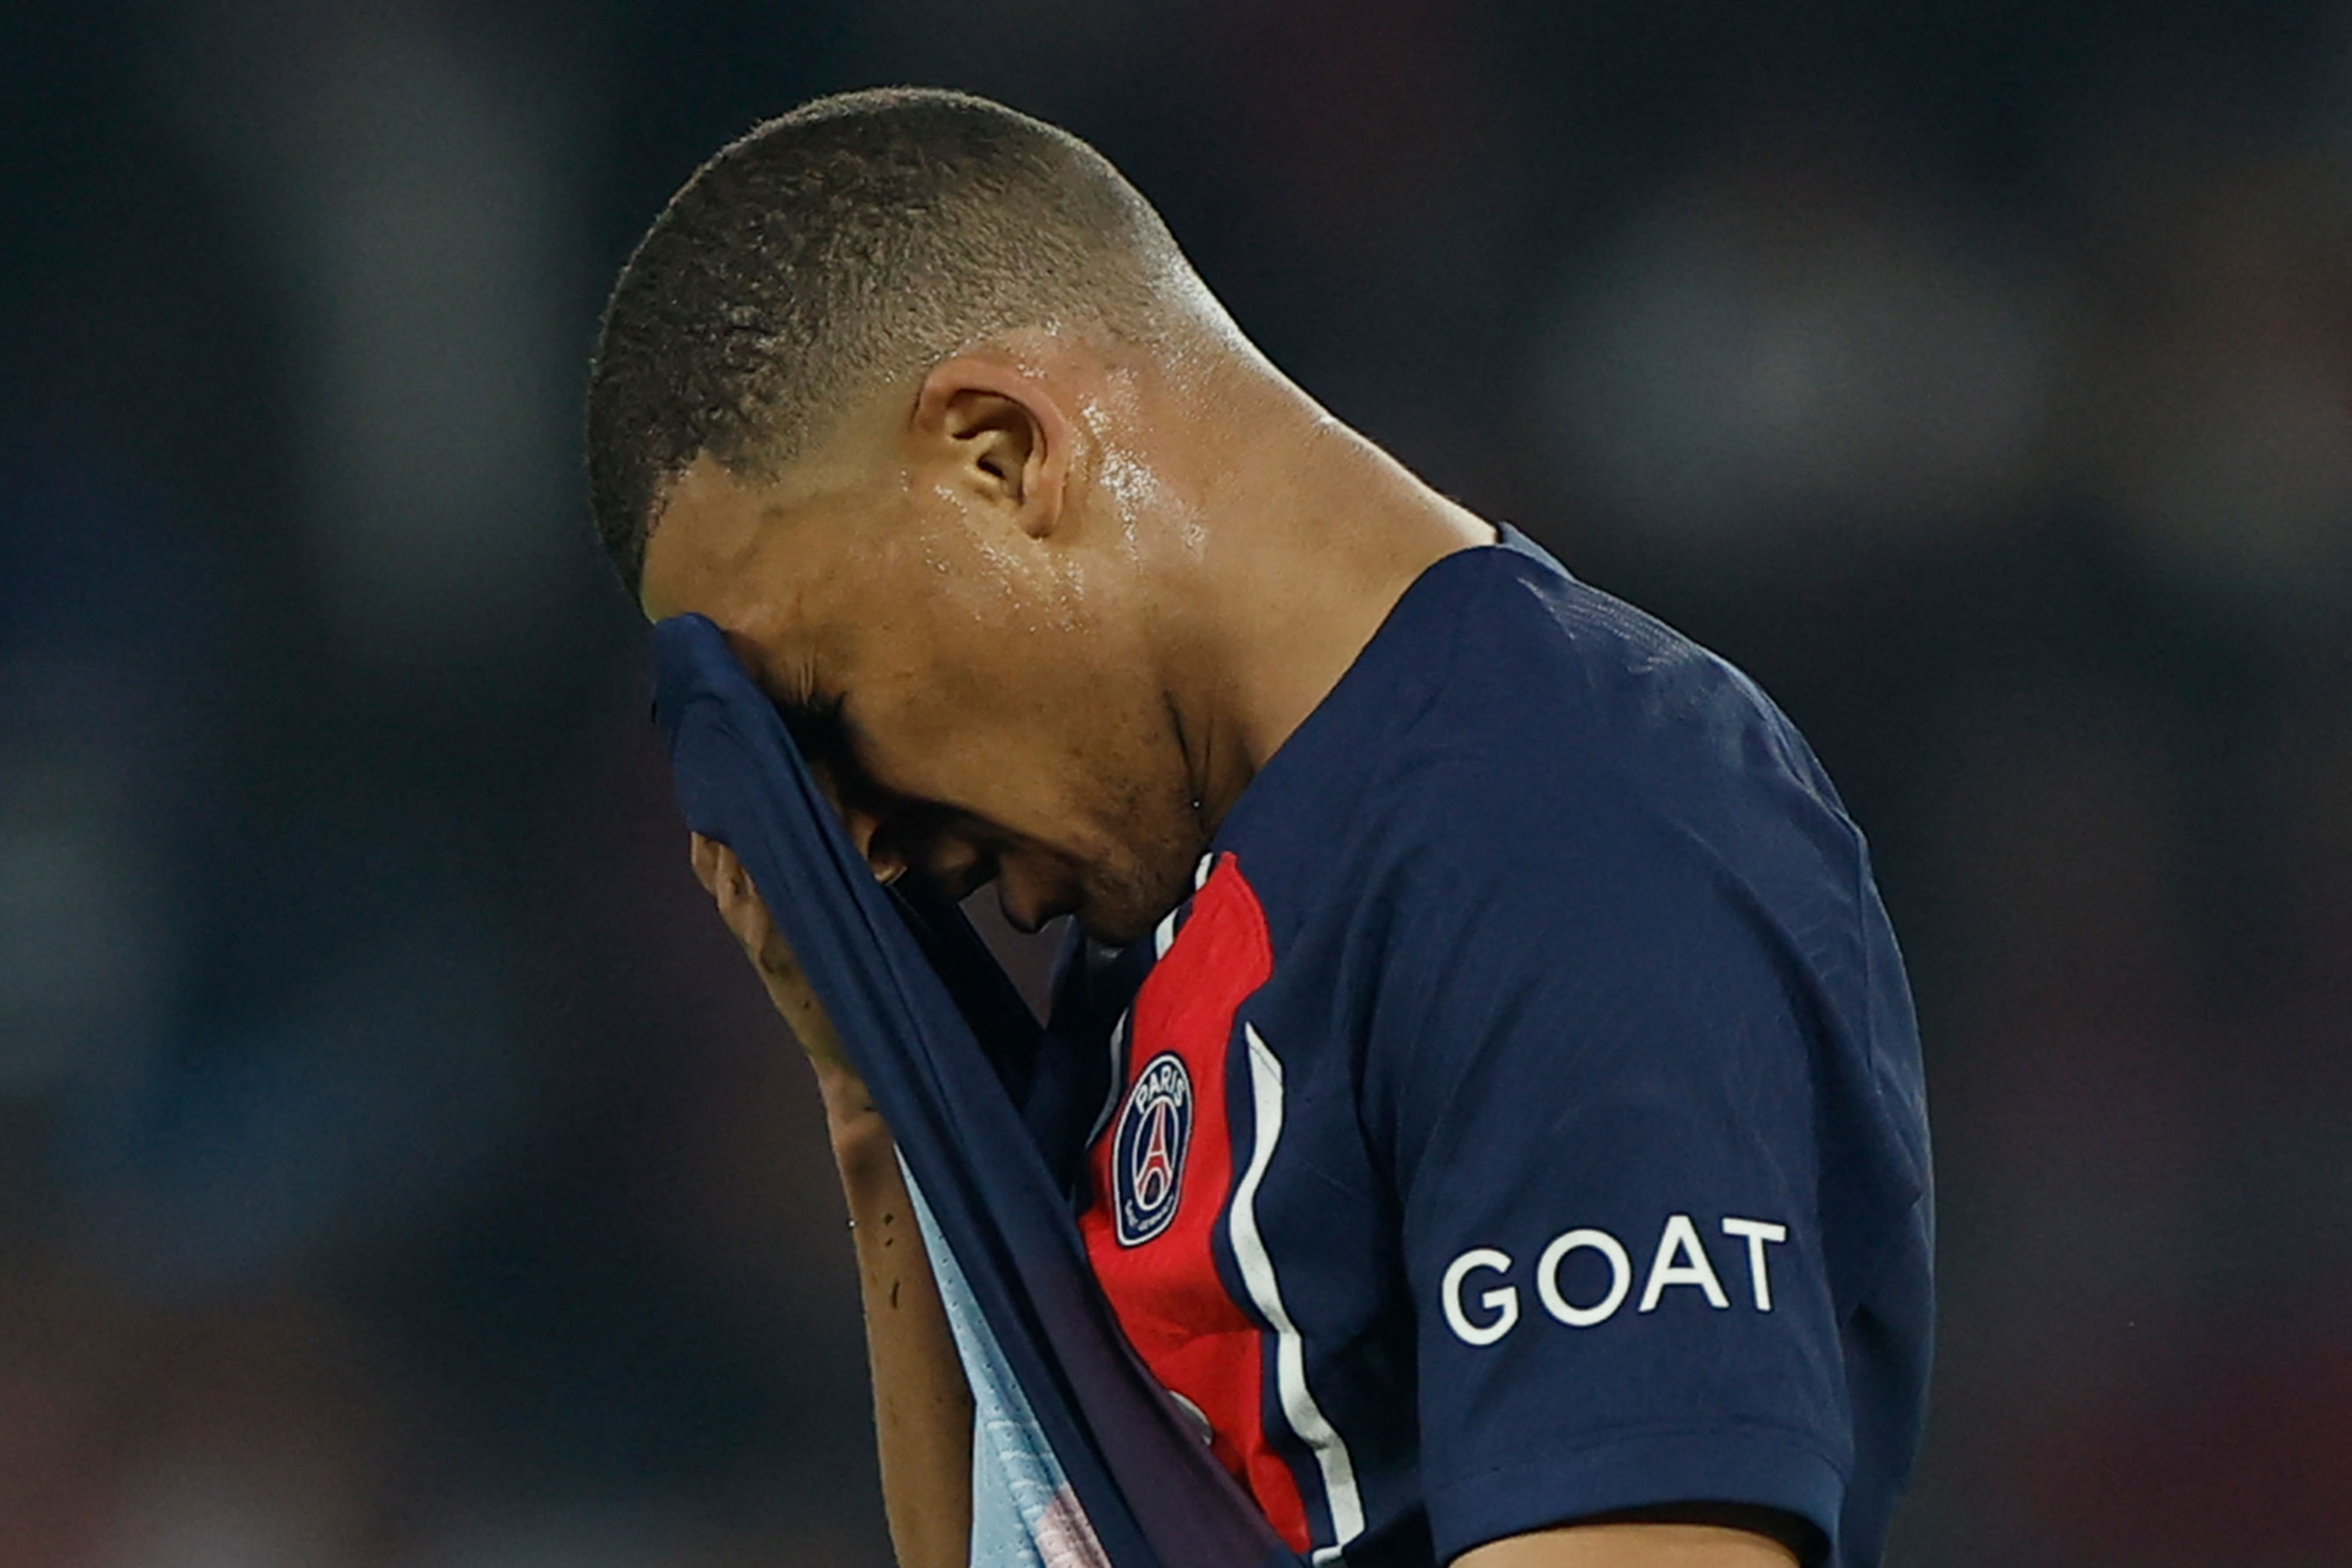 kylian mbappe ends psg era in most fitting way – another champions league failure